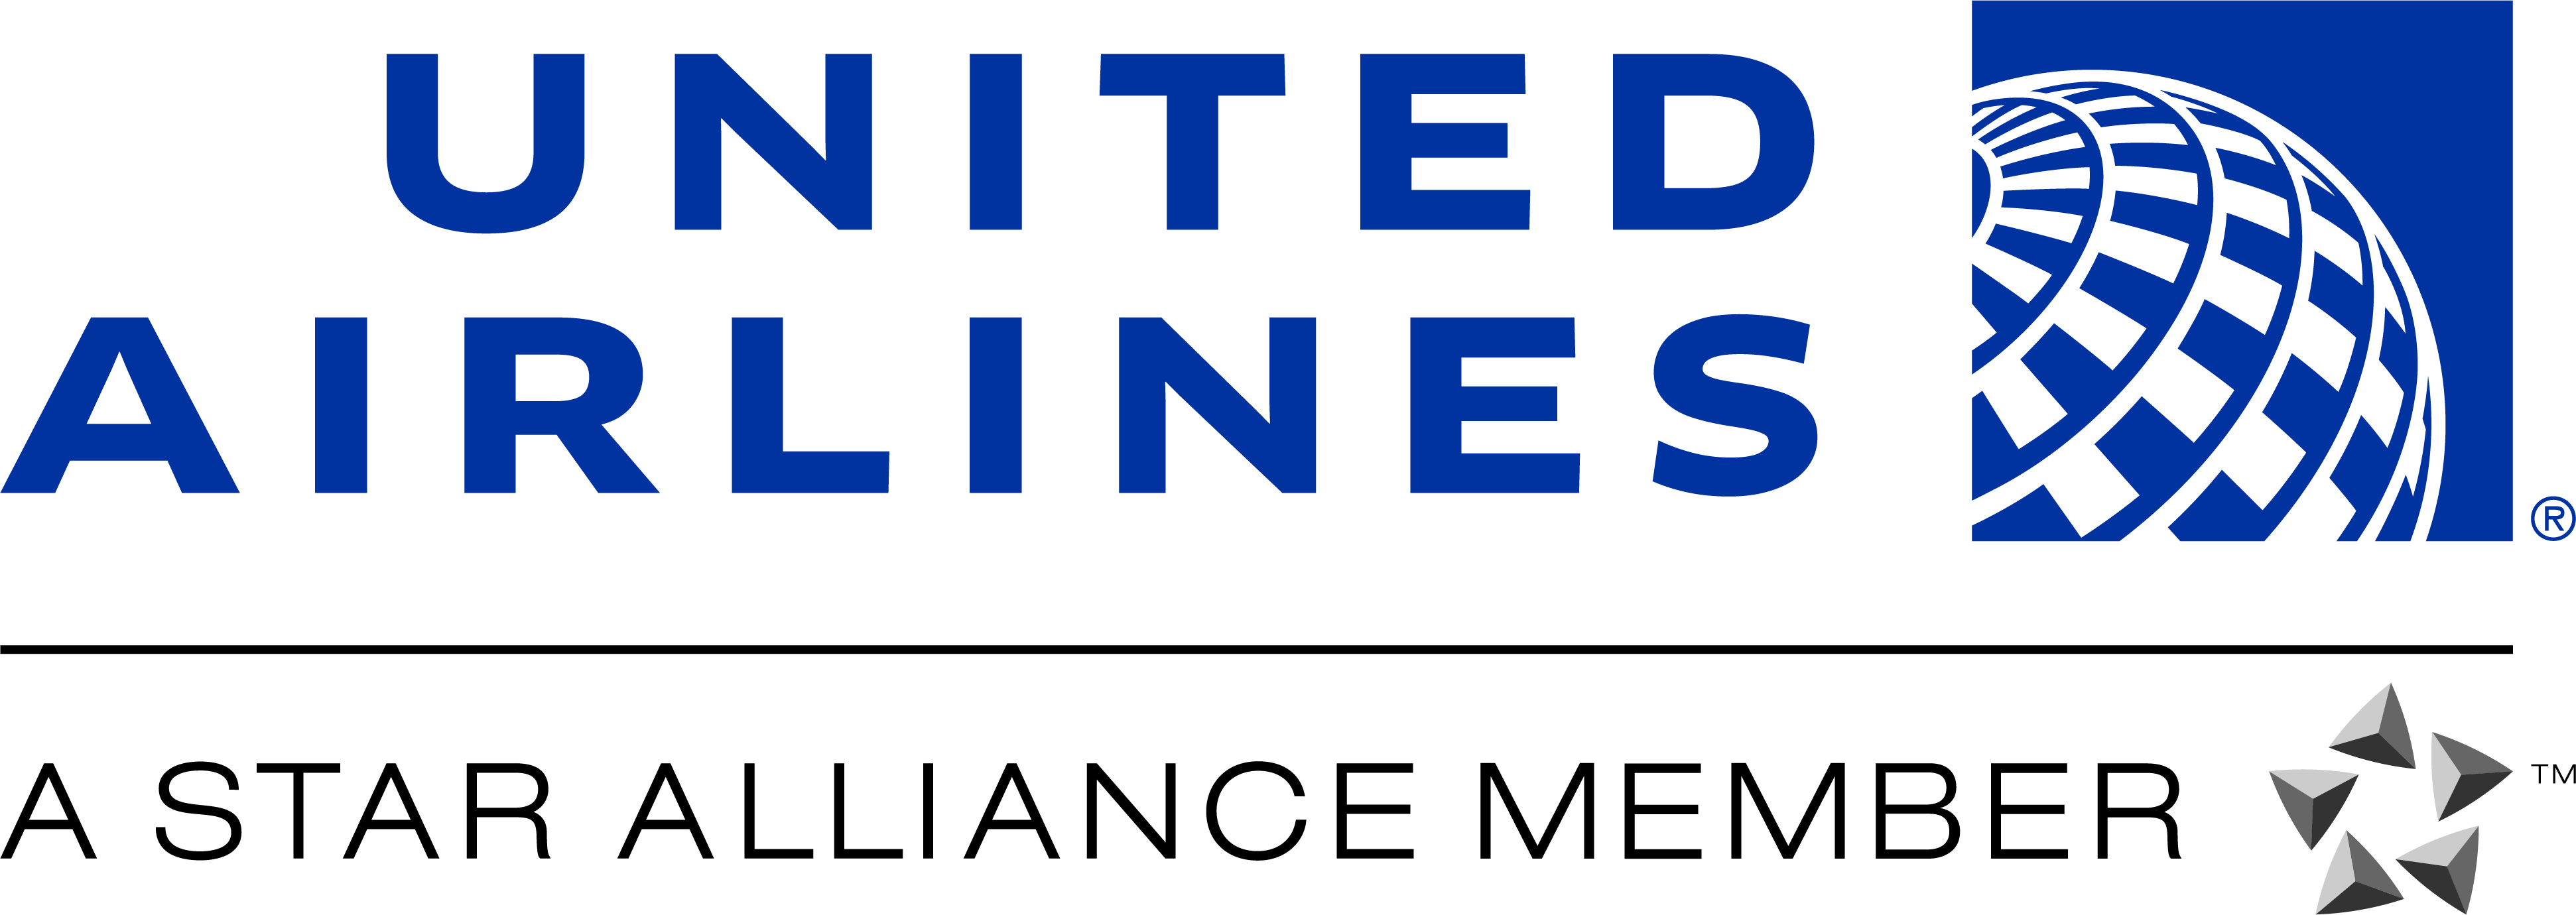 United Operates Daily Nonstop Services From Sydney (3884x1380), Png Download